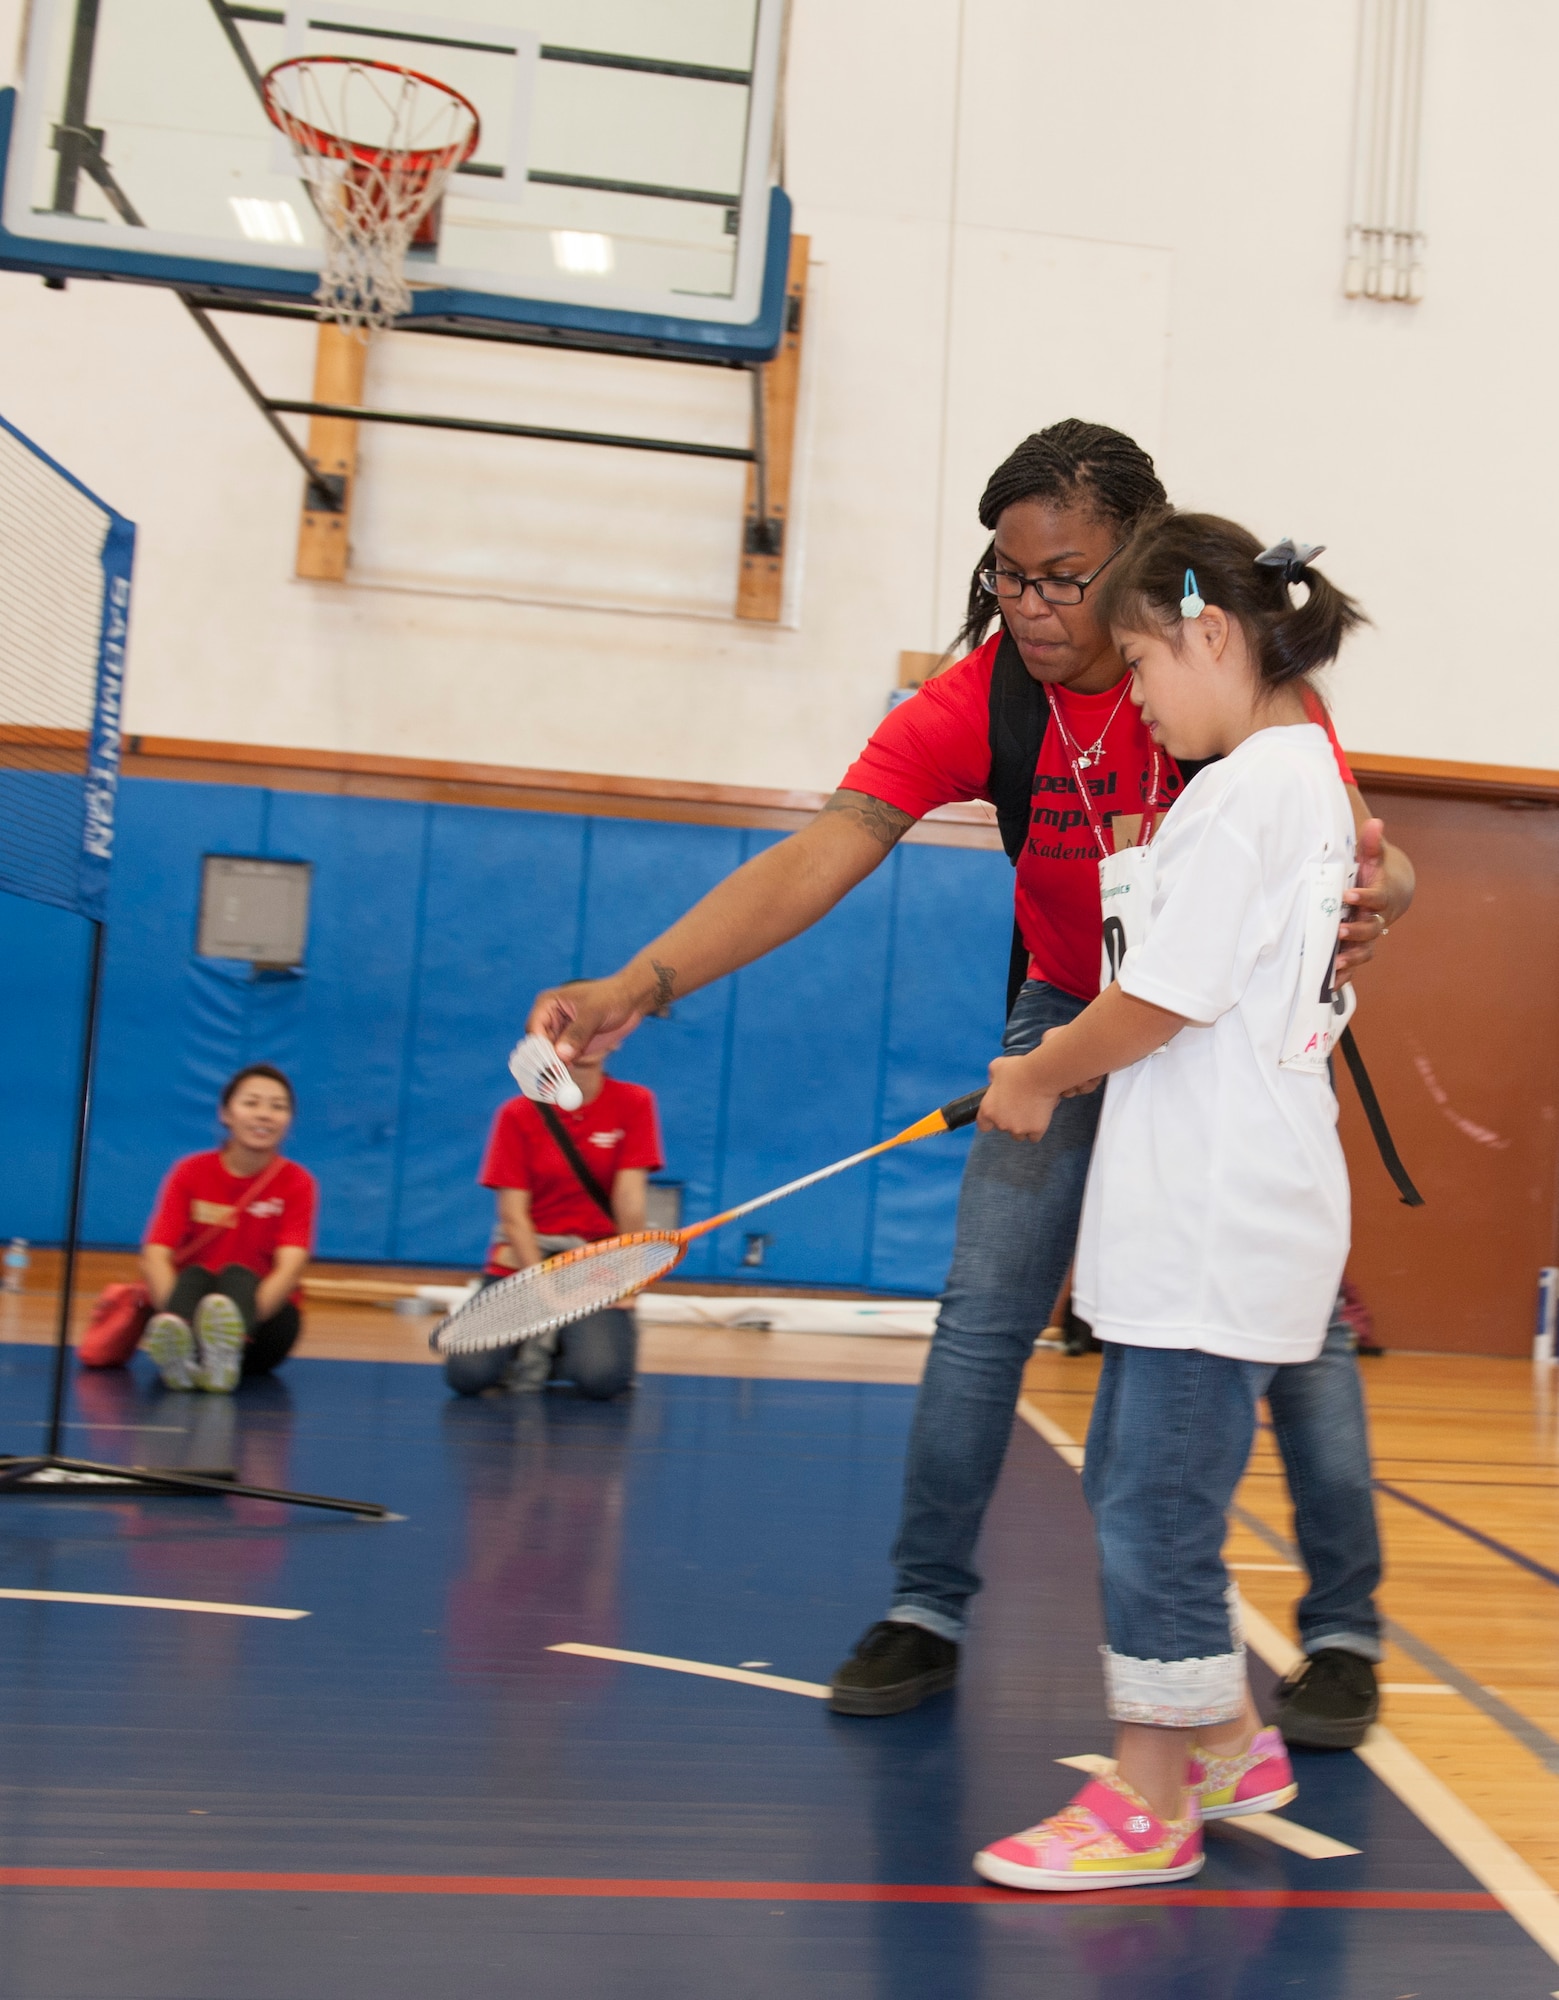 U.S. Air Force Airman 1st Class Amiya Jones, 18th Security Forces Squadron armorer, helps Yuri Yonaha, a Kadena Special Olympics athlete, with her badminton skills during the Kadena Special Olympics Nov. 7, 2015, at Kadena Air Base, Japan. This year marks the 16th anniversary of KSO, a sporting event dedicated to enriching the lives of American and Okinawan special needs individuals on the island. (U.S. Air Force photo by Airman 1st Class Lynette M. Rolen/Released)